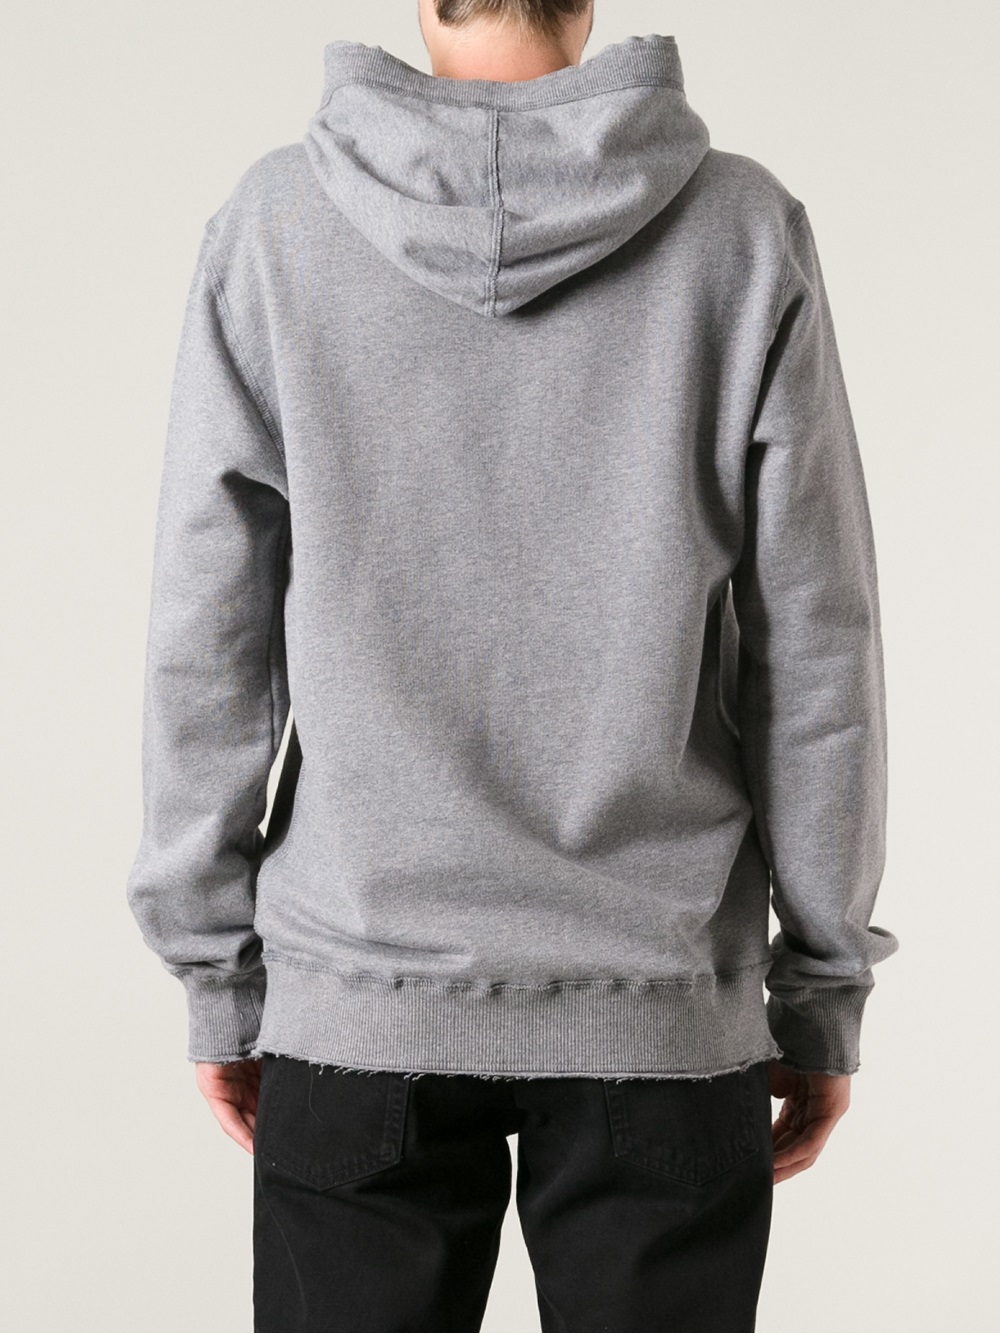 Lyst - Dolce & gabbana Printed Hoodie in Gray for Men